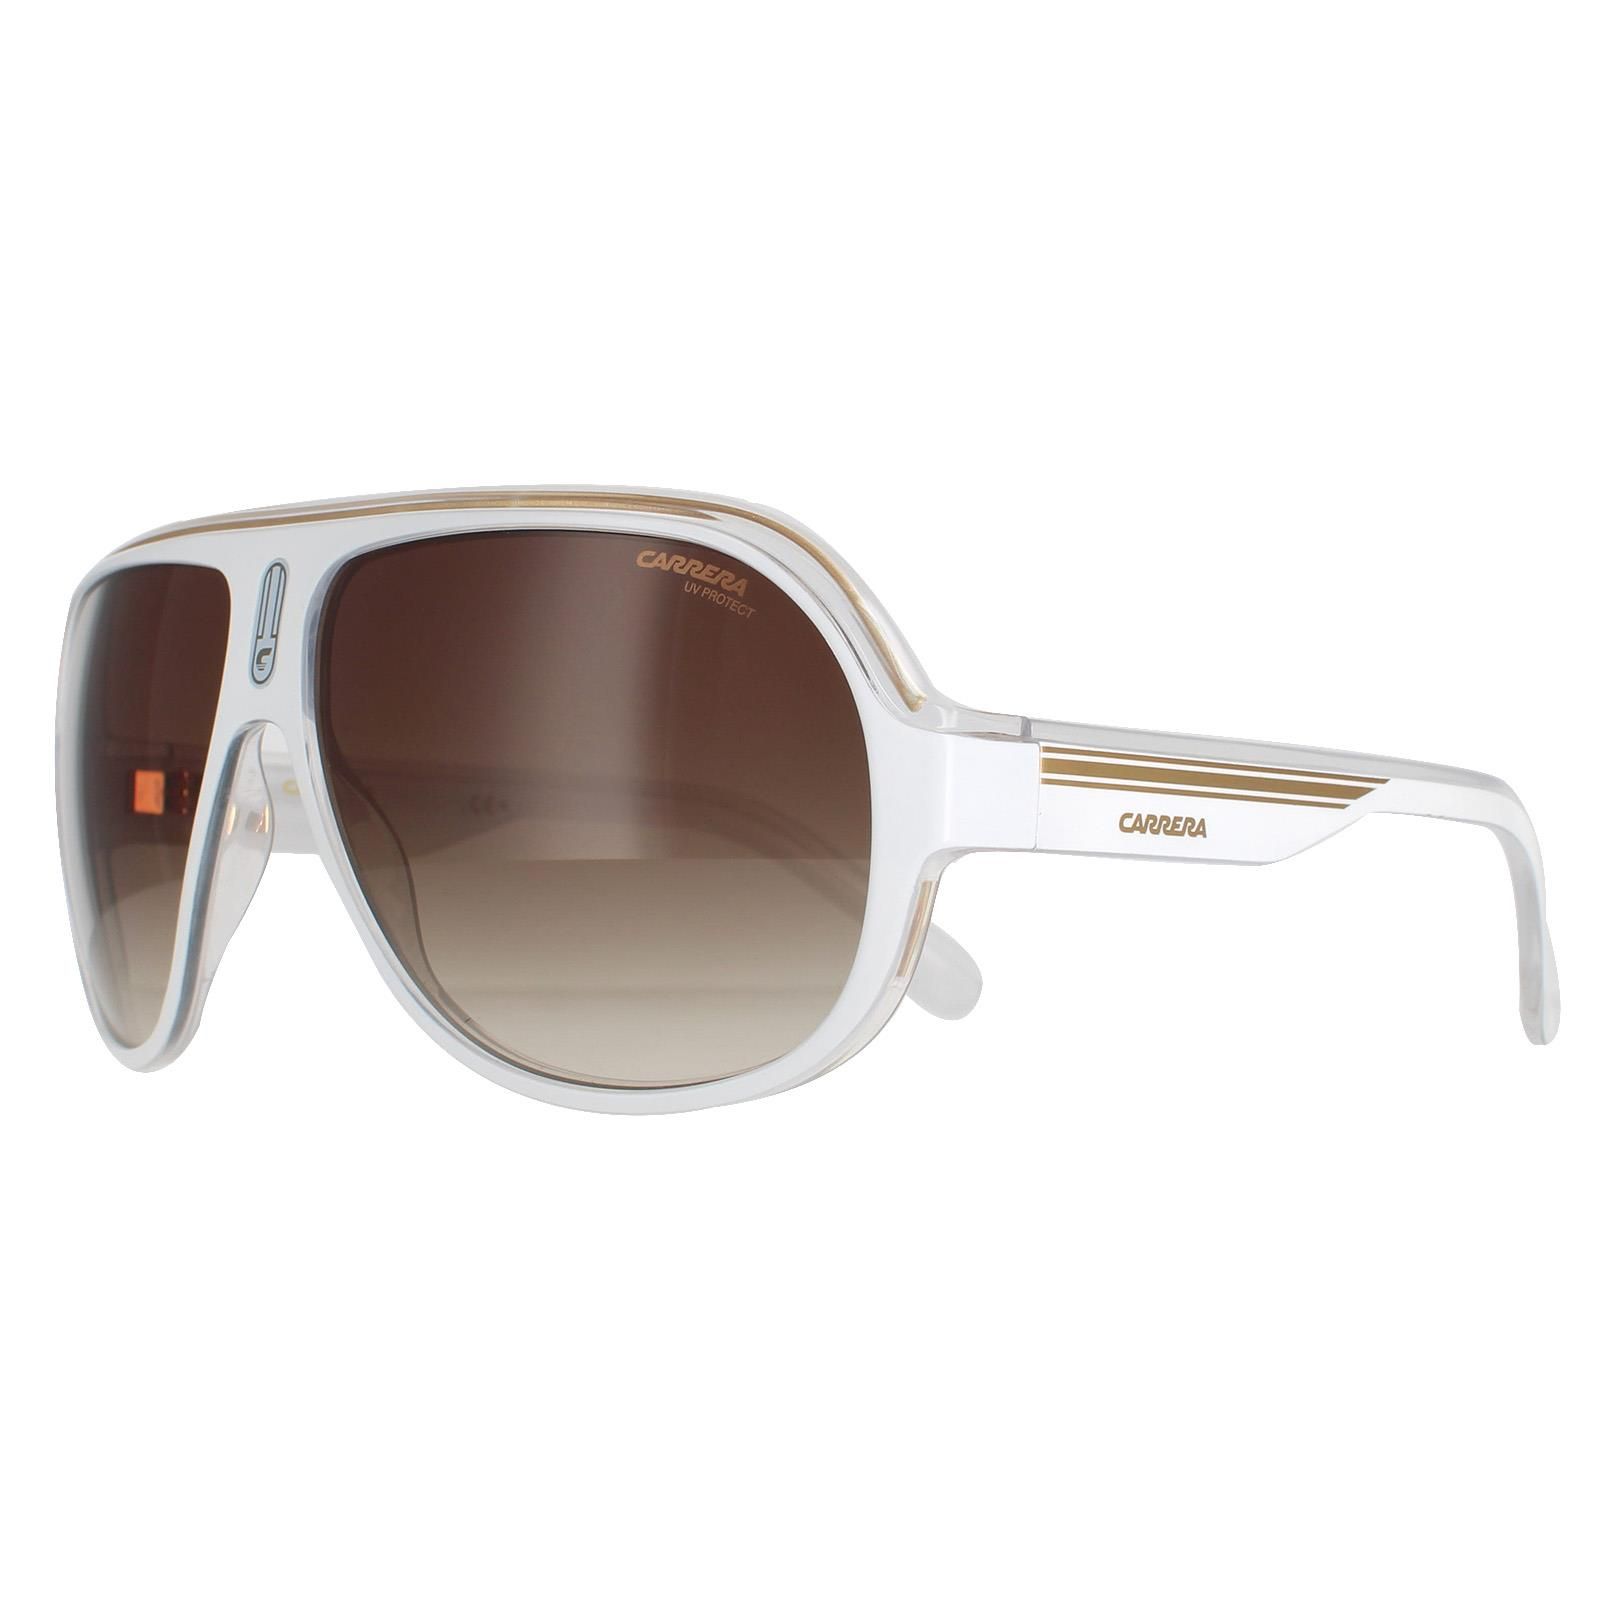 Carrera Aviator Unisex White Crystal Brown Gradient Speedway/N  Carrera are a new model in the Carrera sunglasses range in the classic aviator shape with a retro modern update in this chunky acetate frame